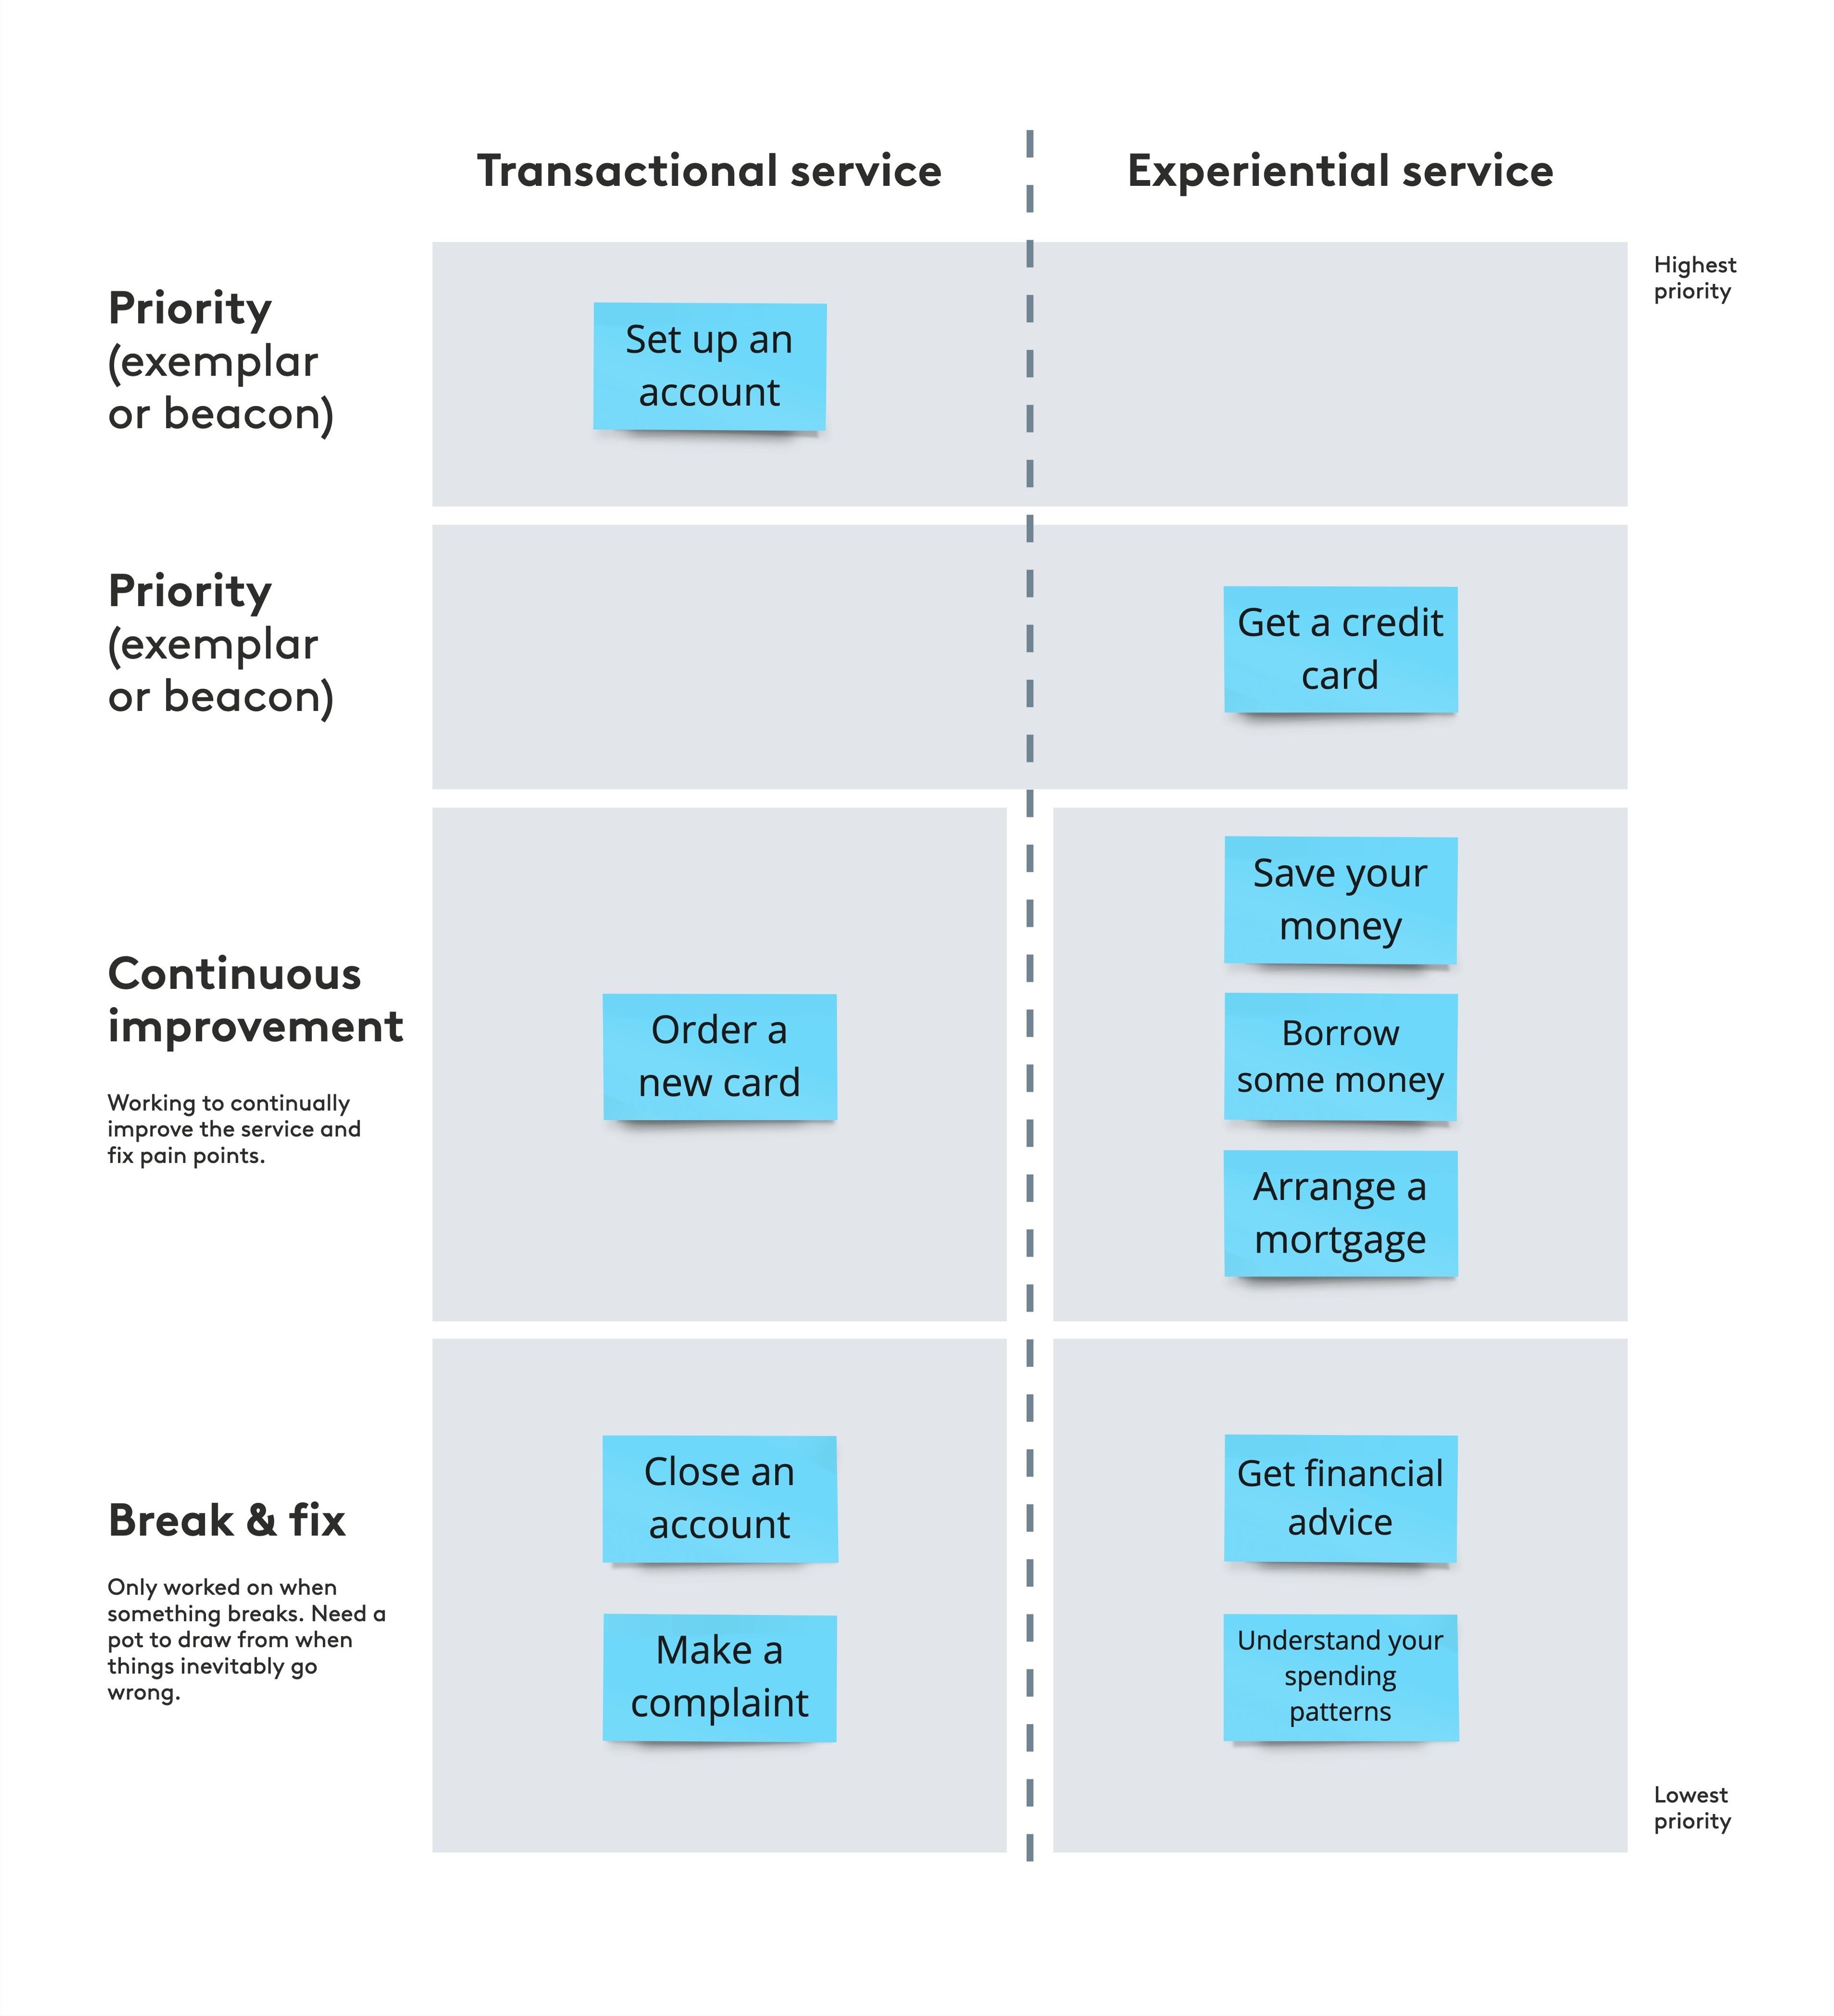 Prioritising services for a bank